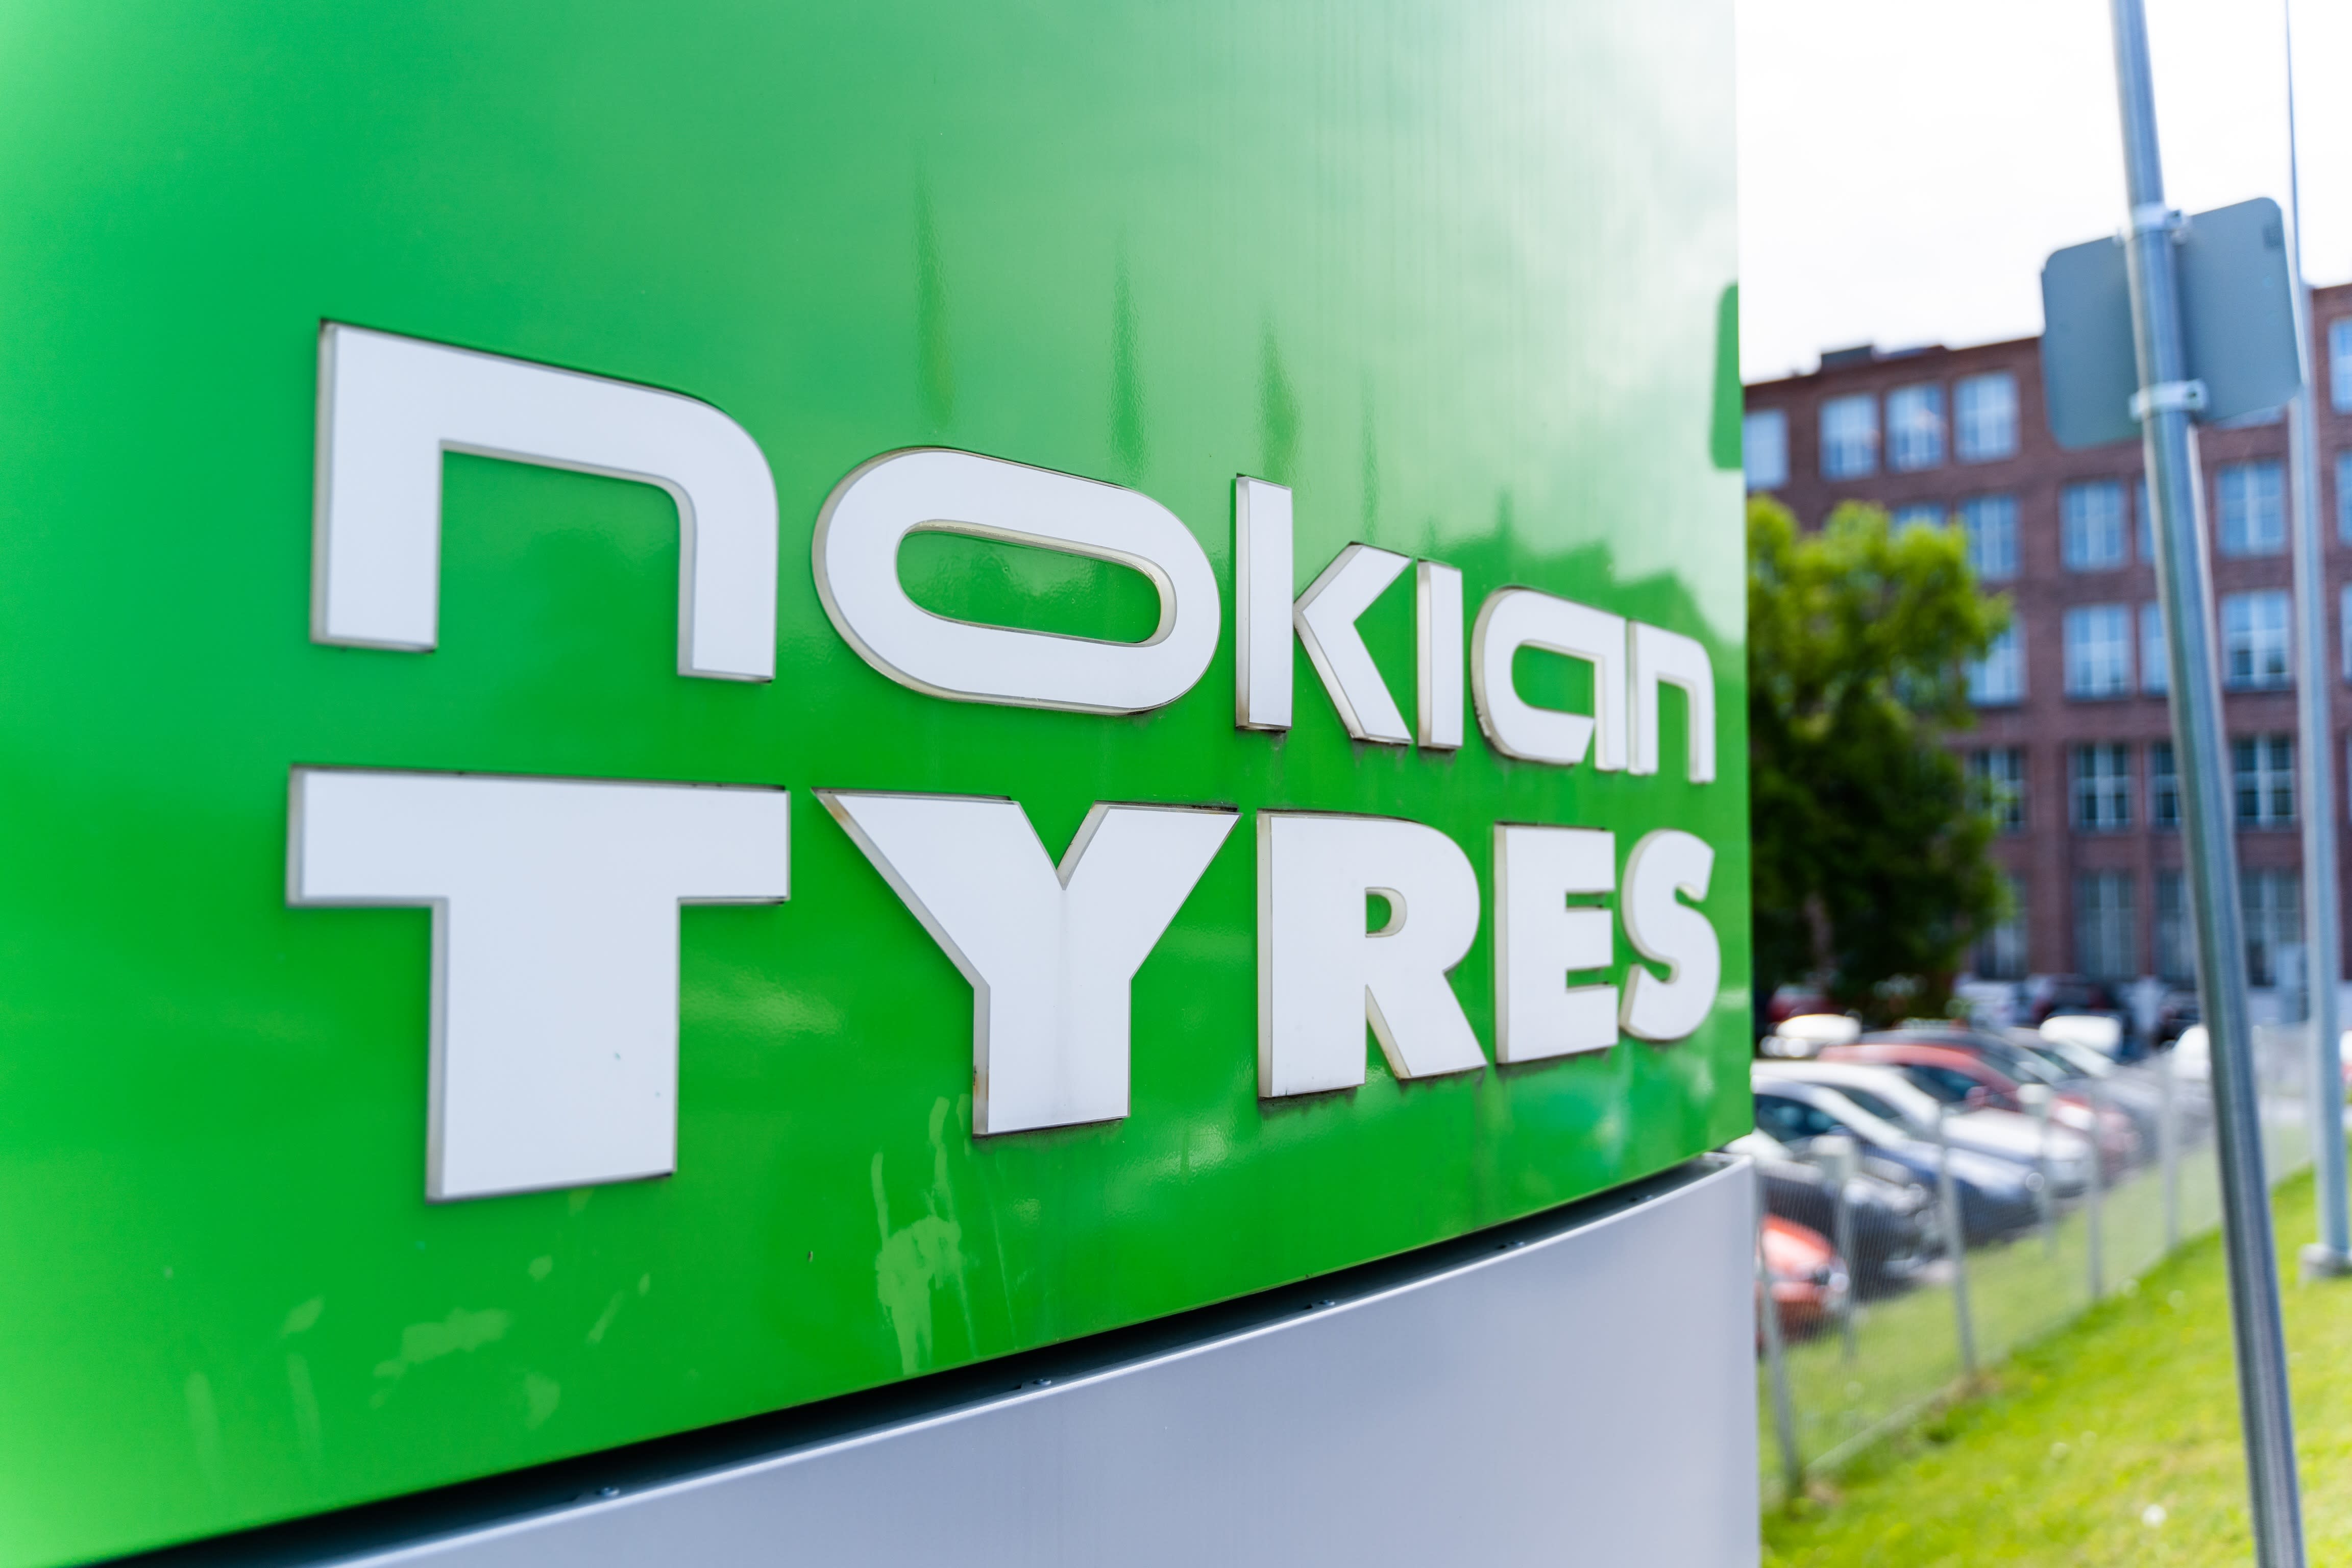 Nokian Tires is planning a new factory in Romania after Russia’s secession